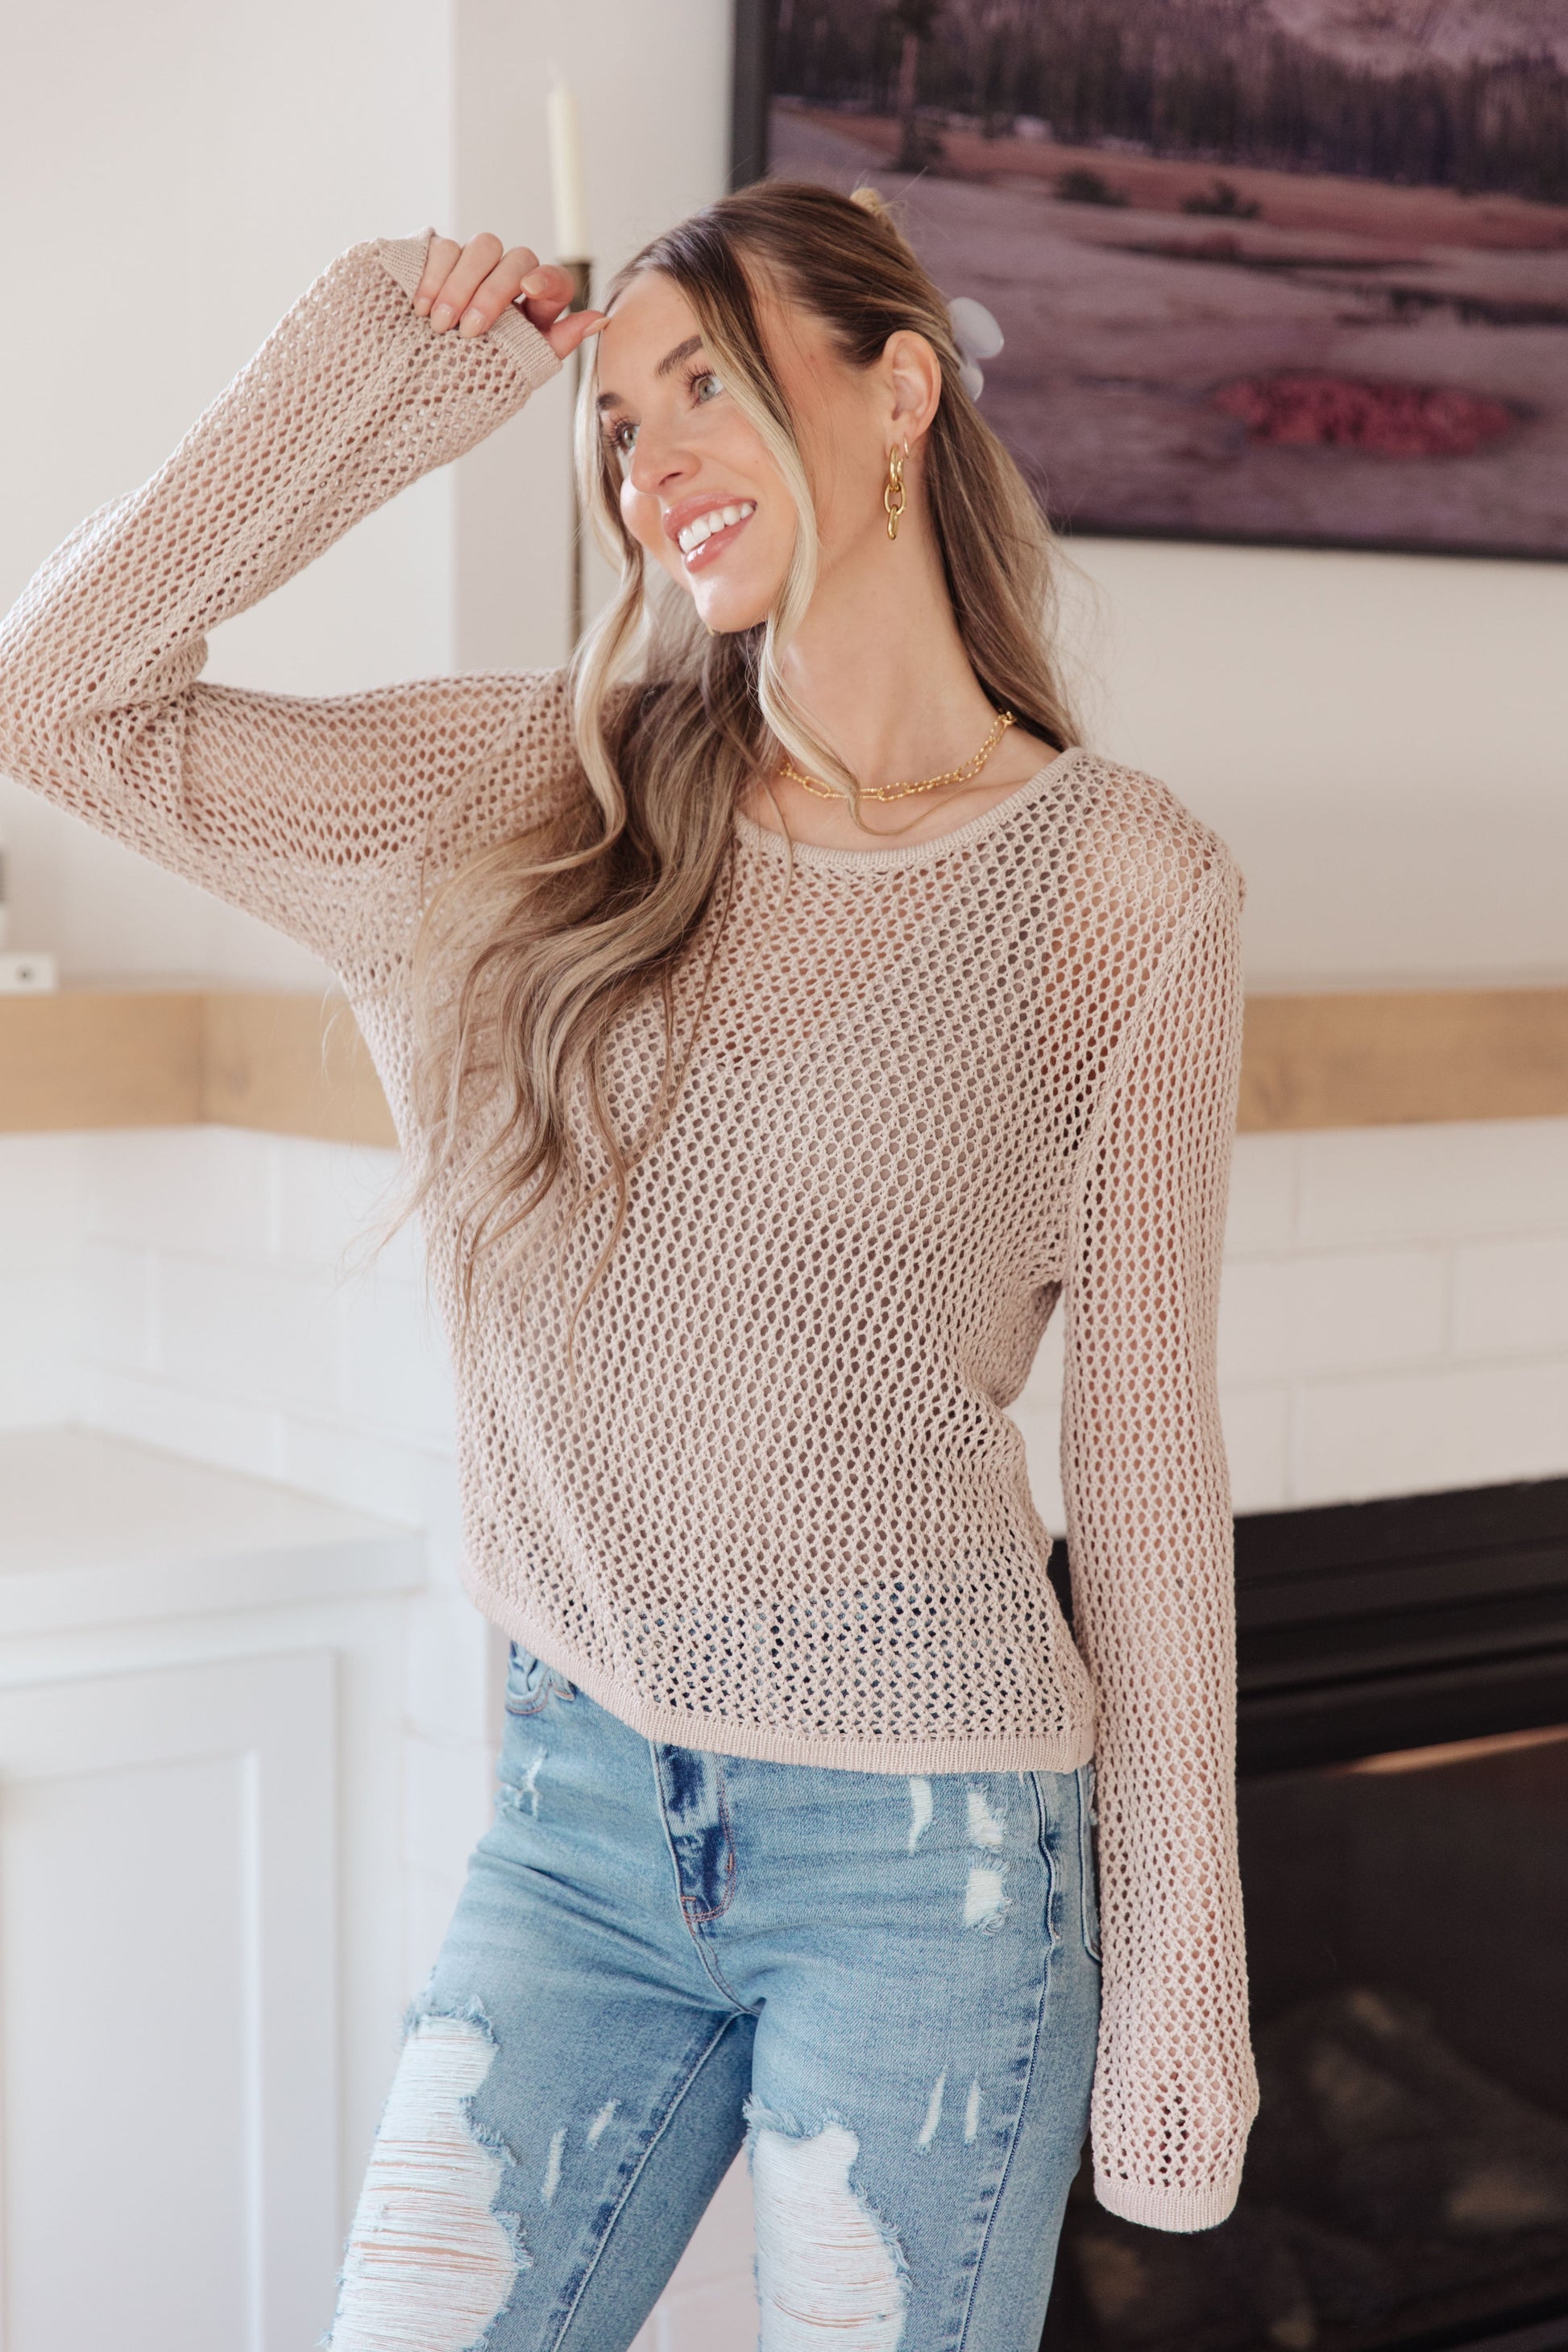 This Calming Down Loose Knit Top offers lightweight comfort. Its sheer layer and relaxed fit will keep you relaxed and comfy all day long! Perfect for when you need to take it easy.S-3X